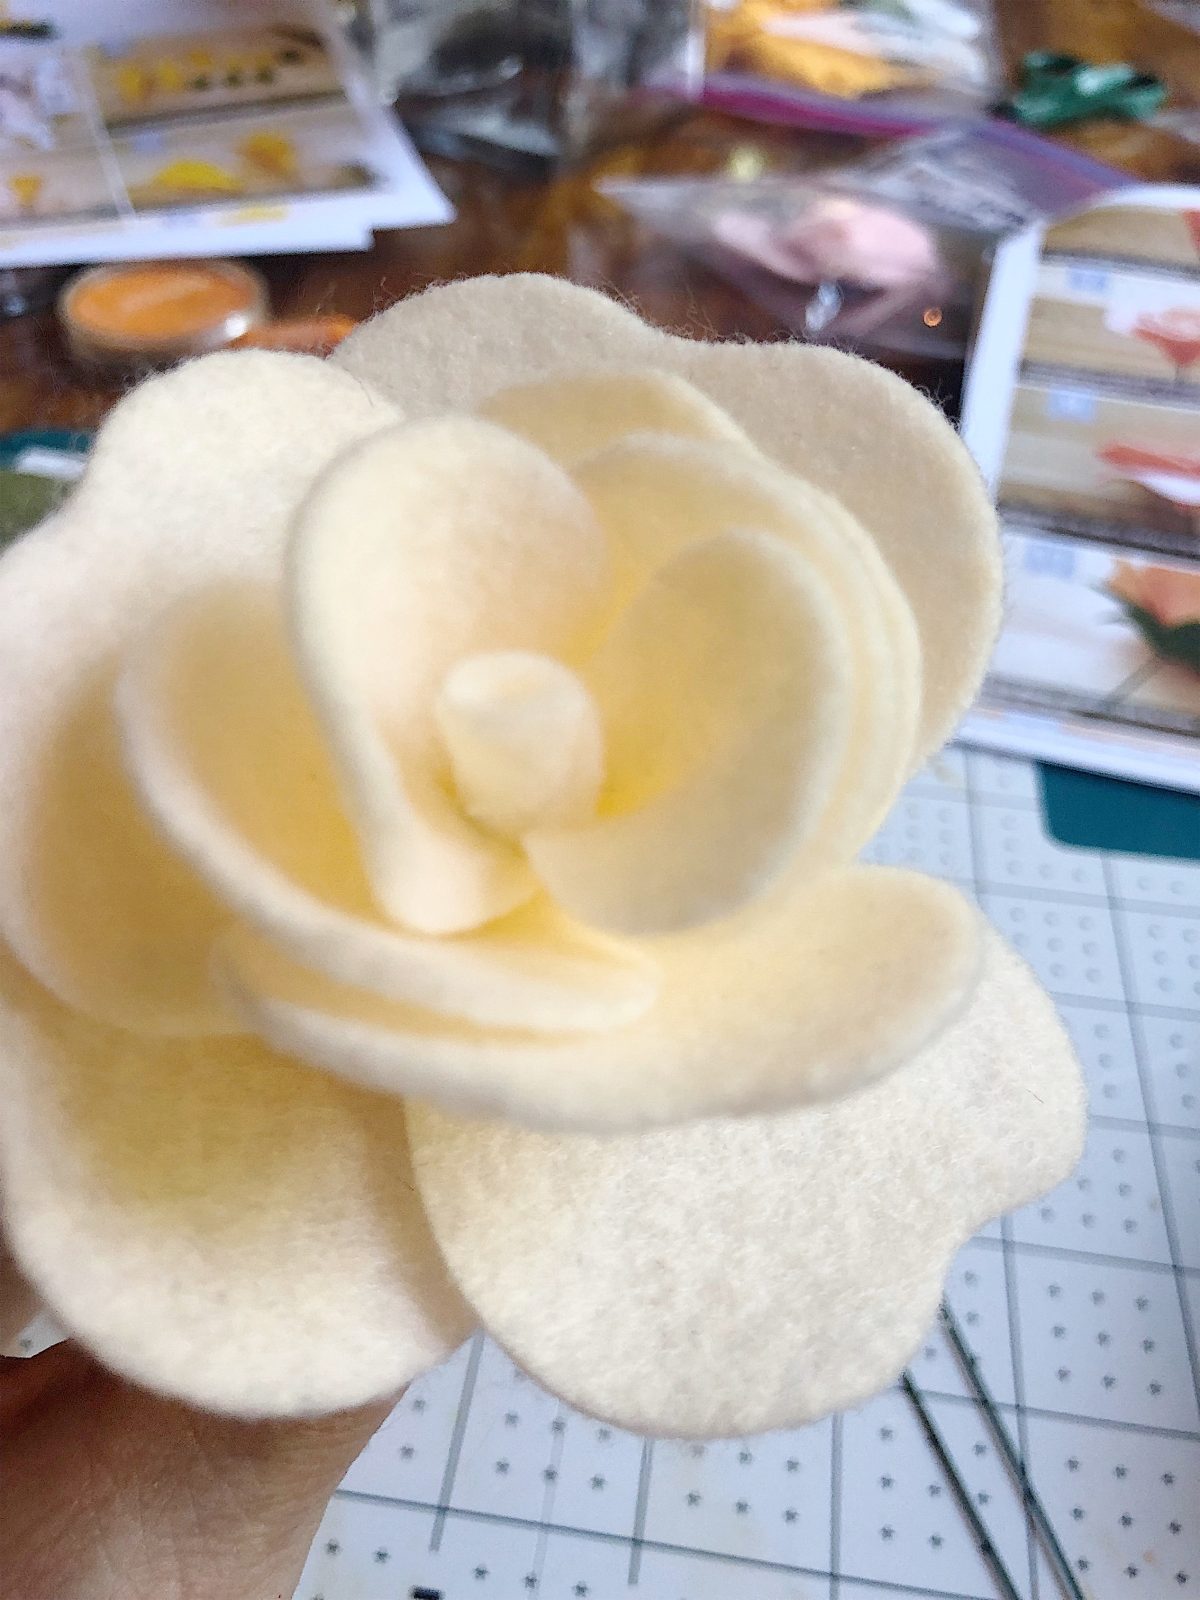 How to Cut and Make a Felt Flower Pillow with the Cricut Maker - MY 100  YEAR OLD HOME